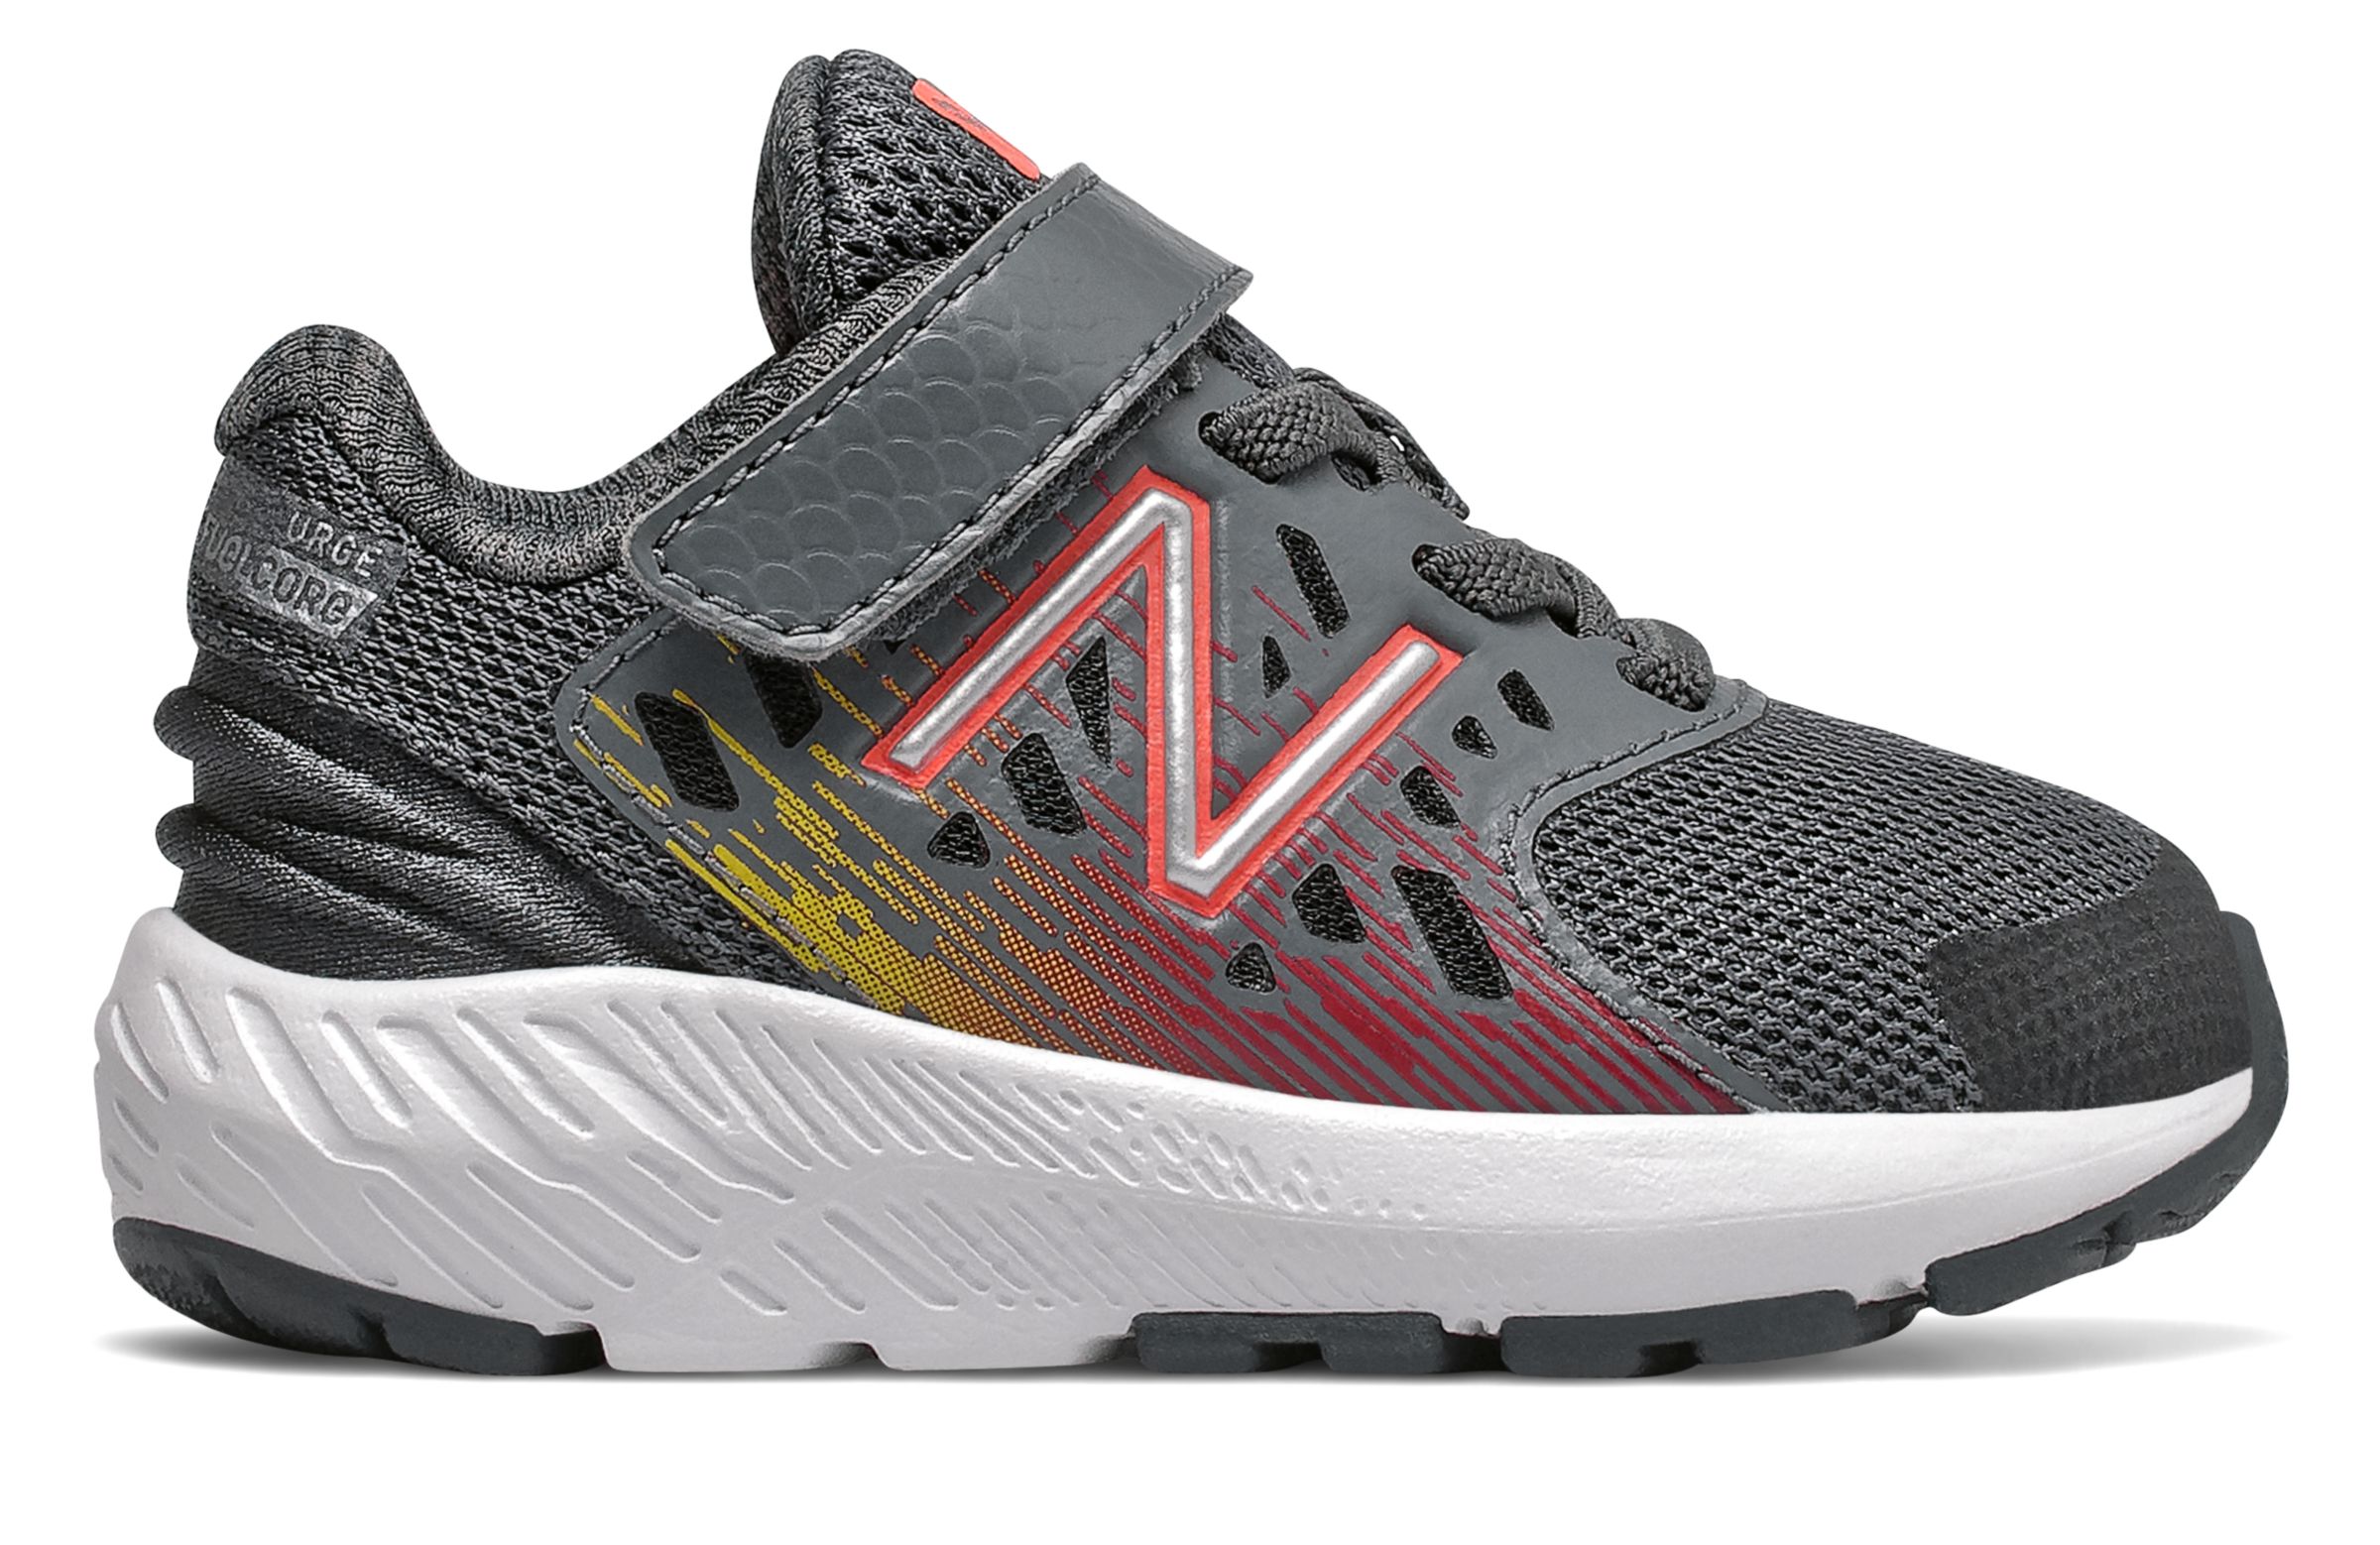 New Balance FuelCore Urge, Lead with Team Red